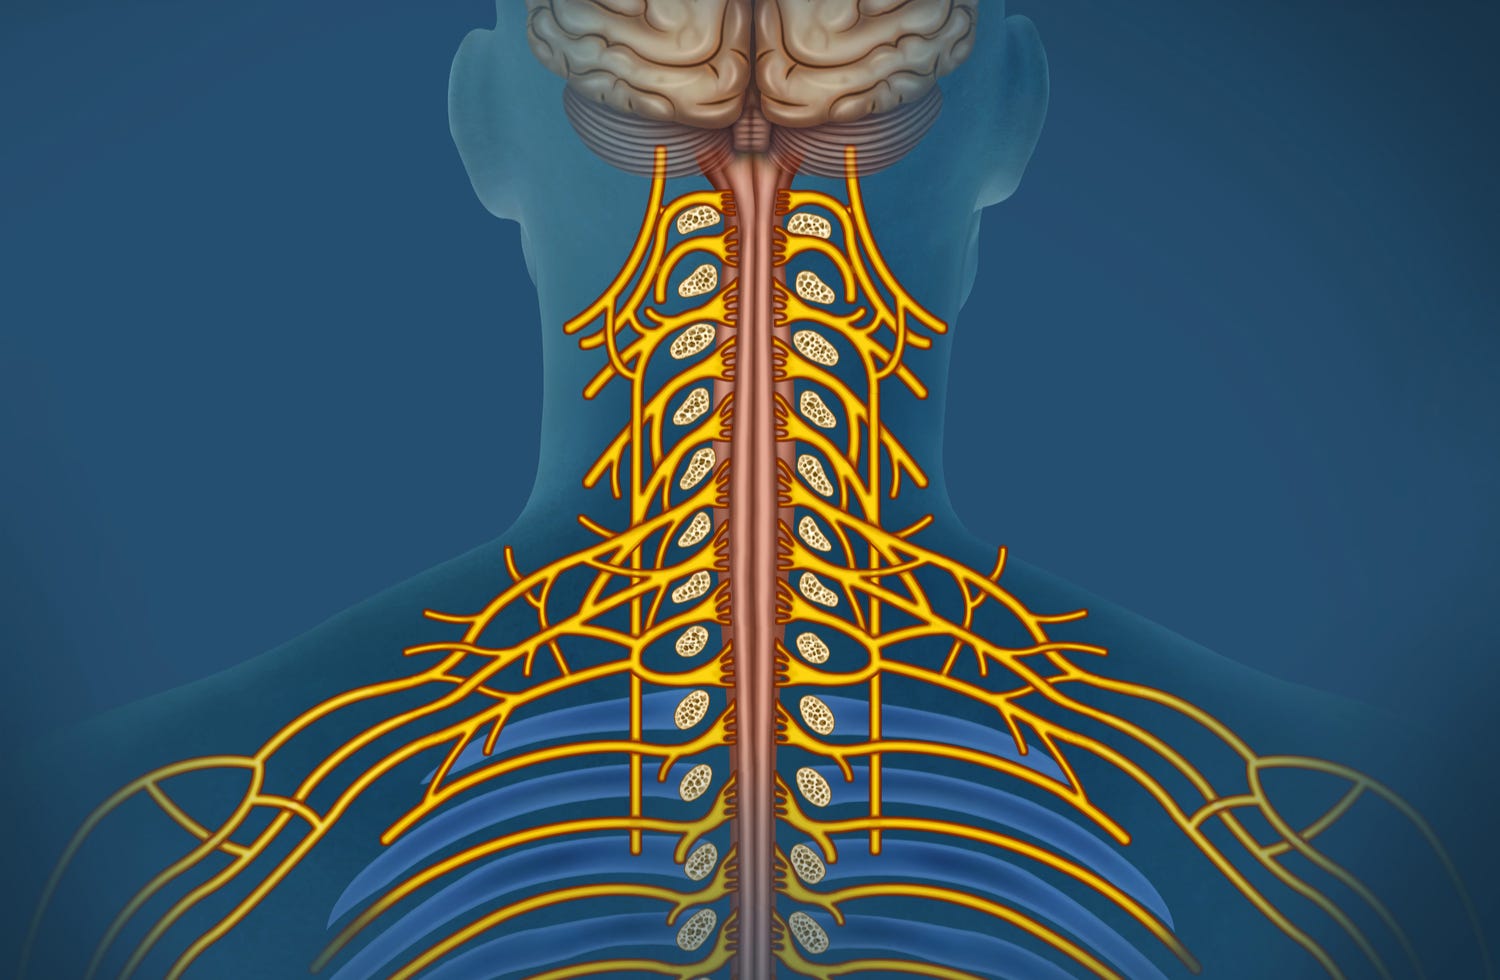 How to Stimulate Your Vagus Nerve and Decompress With a 4:8 Breathing